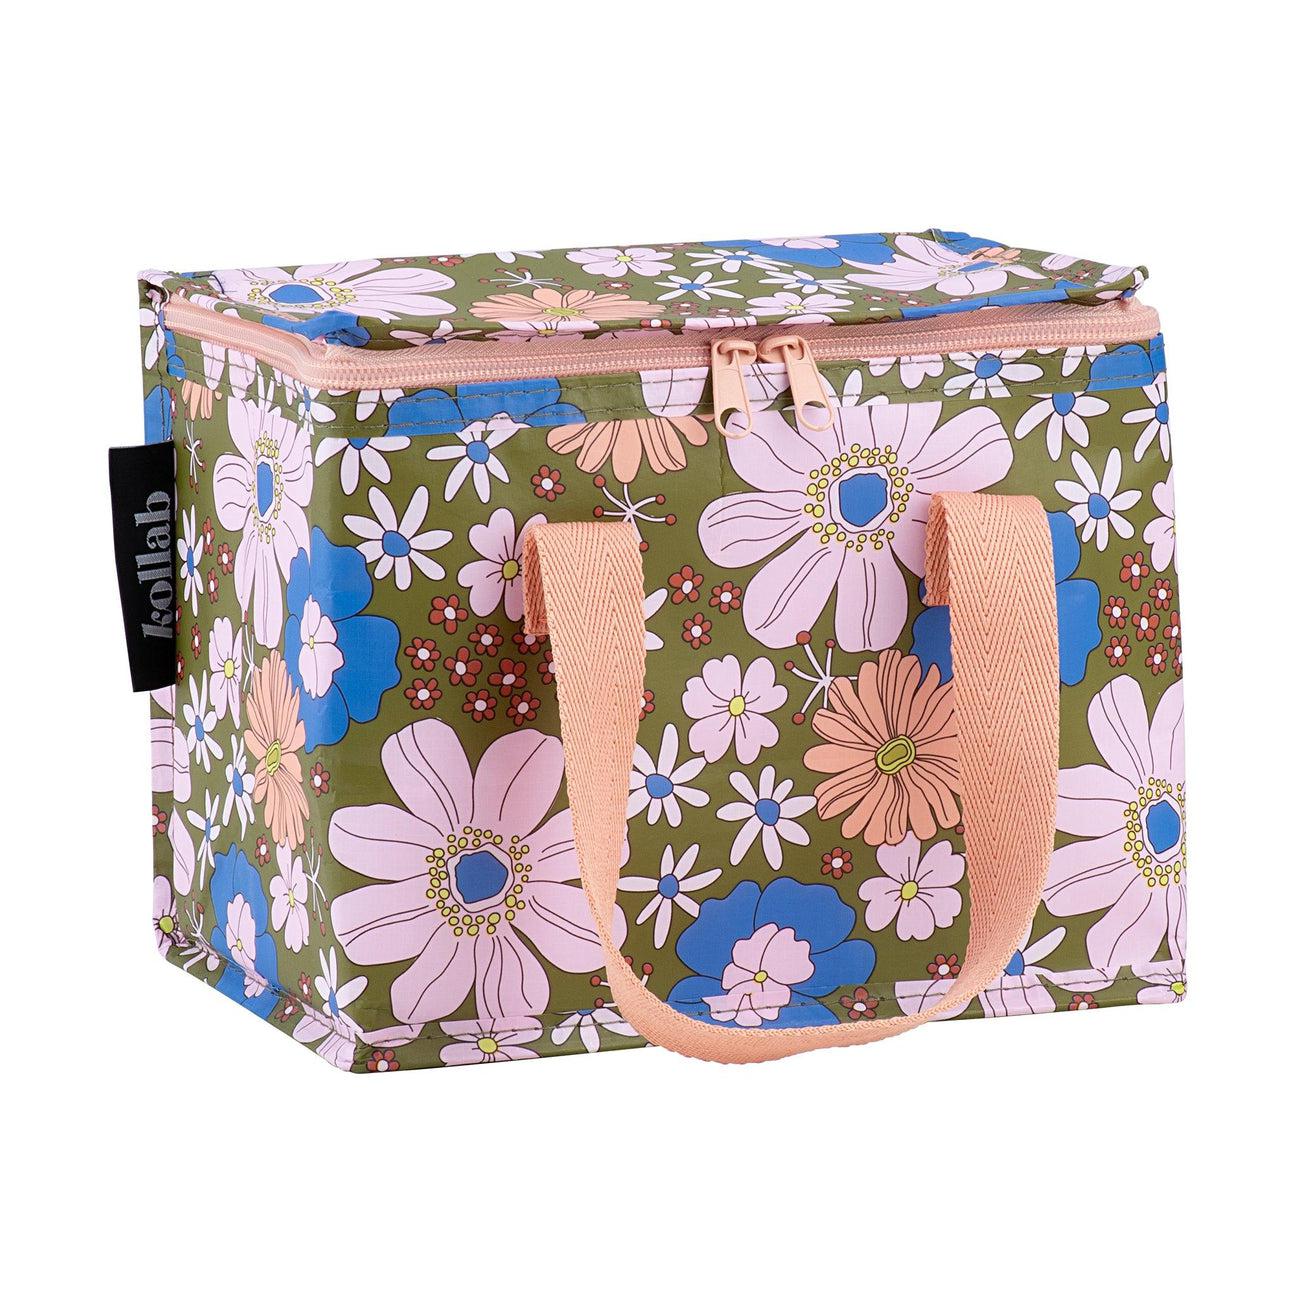 Lunch Box Blue Flowers-Travel & Outdoors-Kollab-The Bay Room